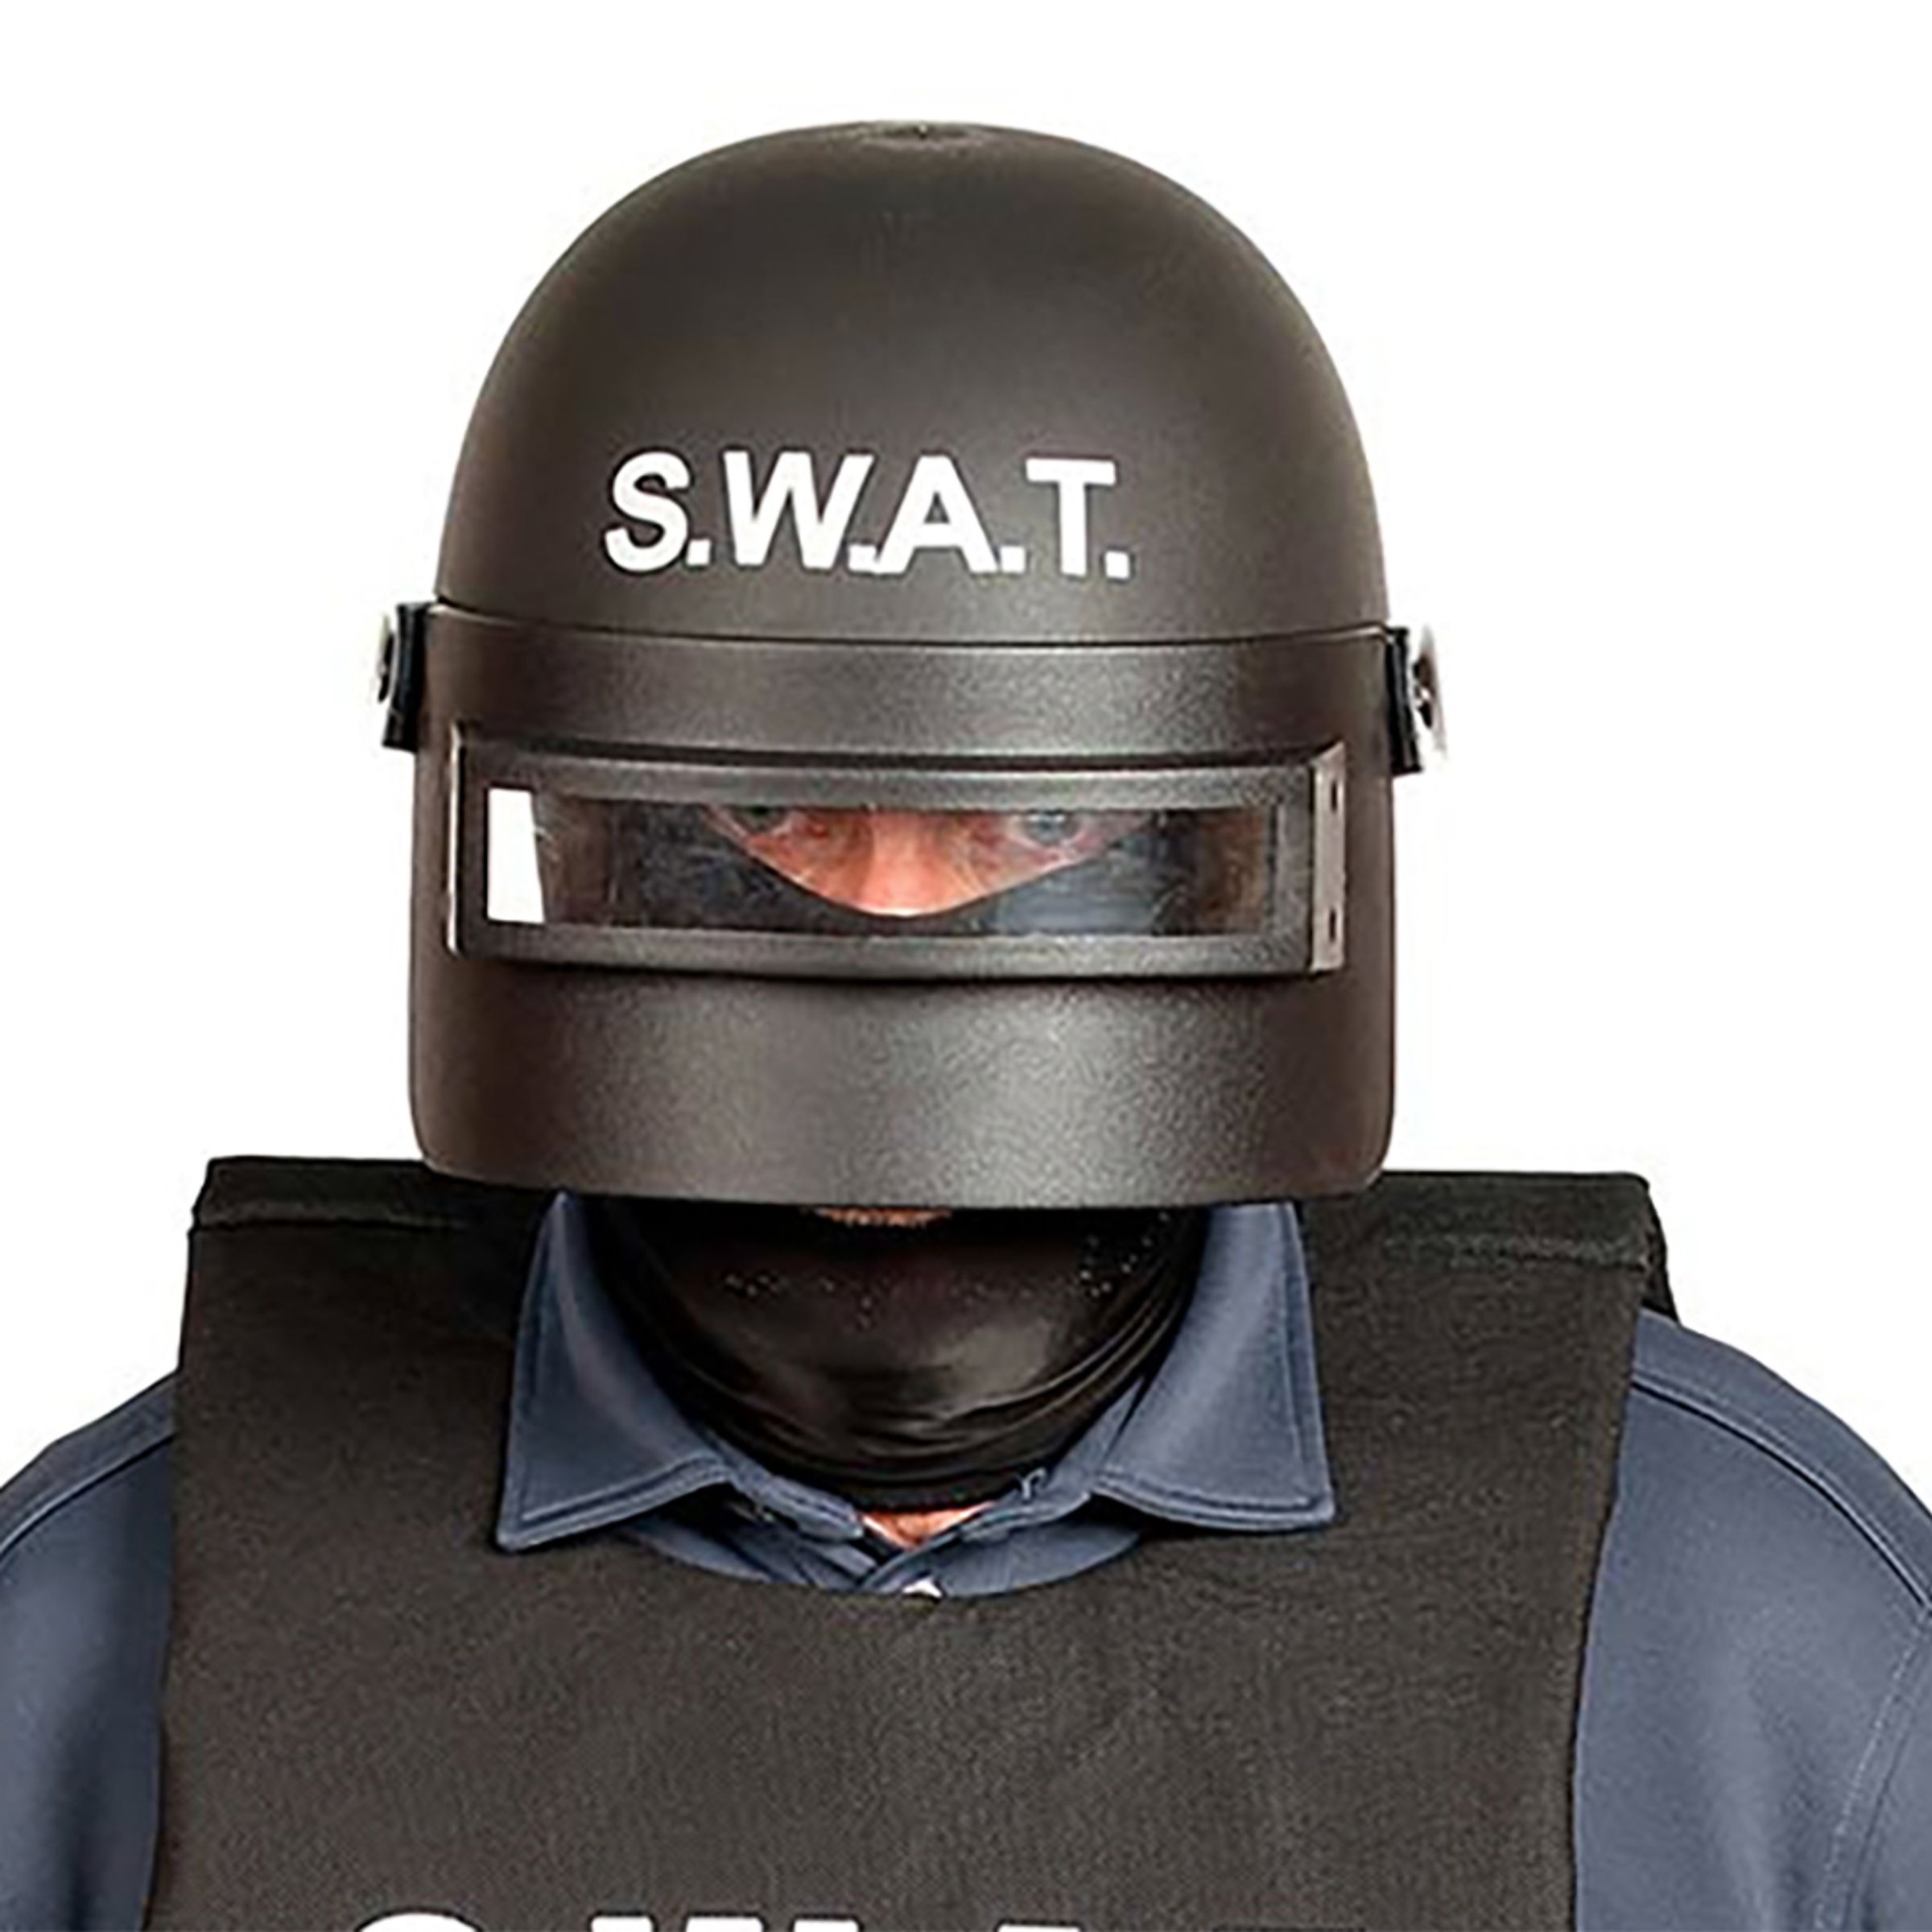 S.W.A.T. Hjälm med Visir - One size